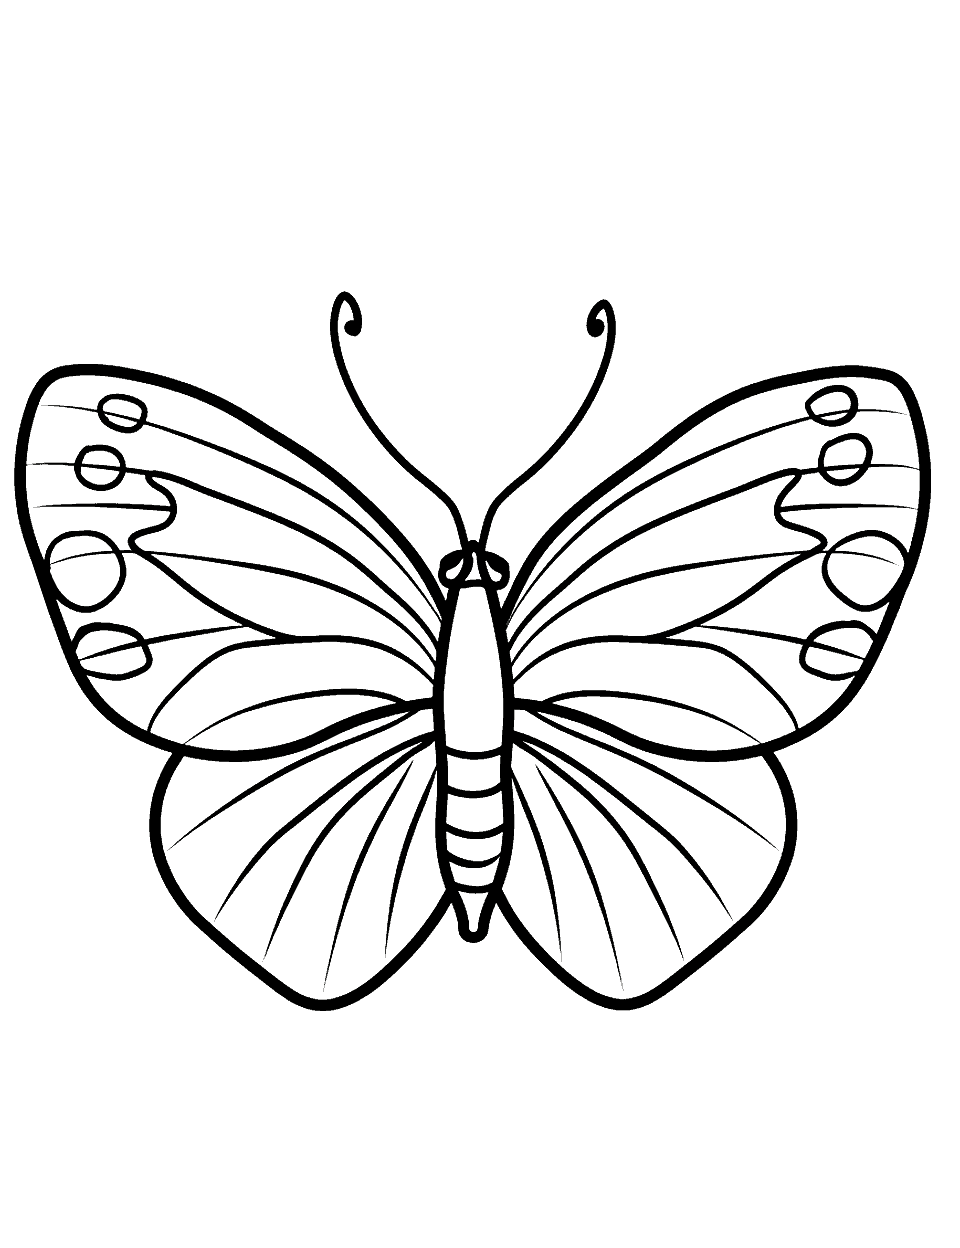 Simple Butterfly Coloring Page - A simple butterfly with easy to draw design.